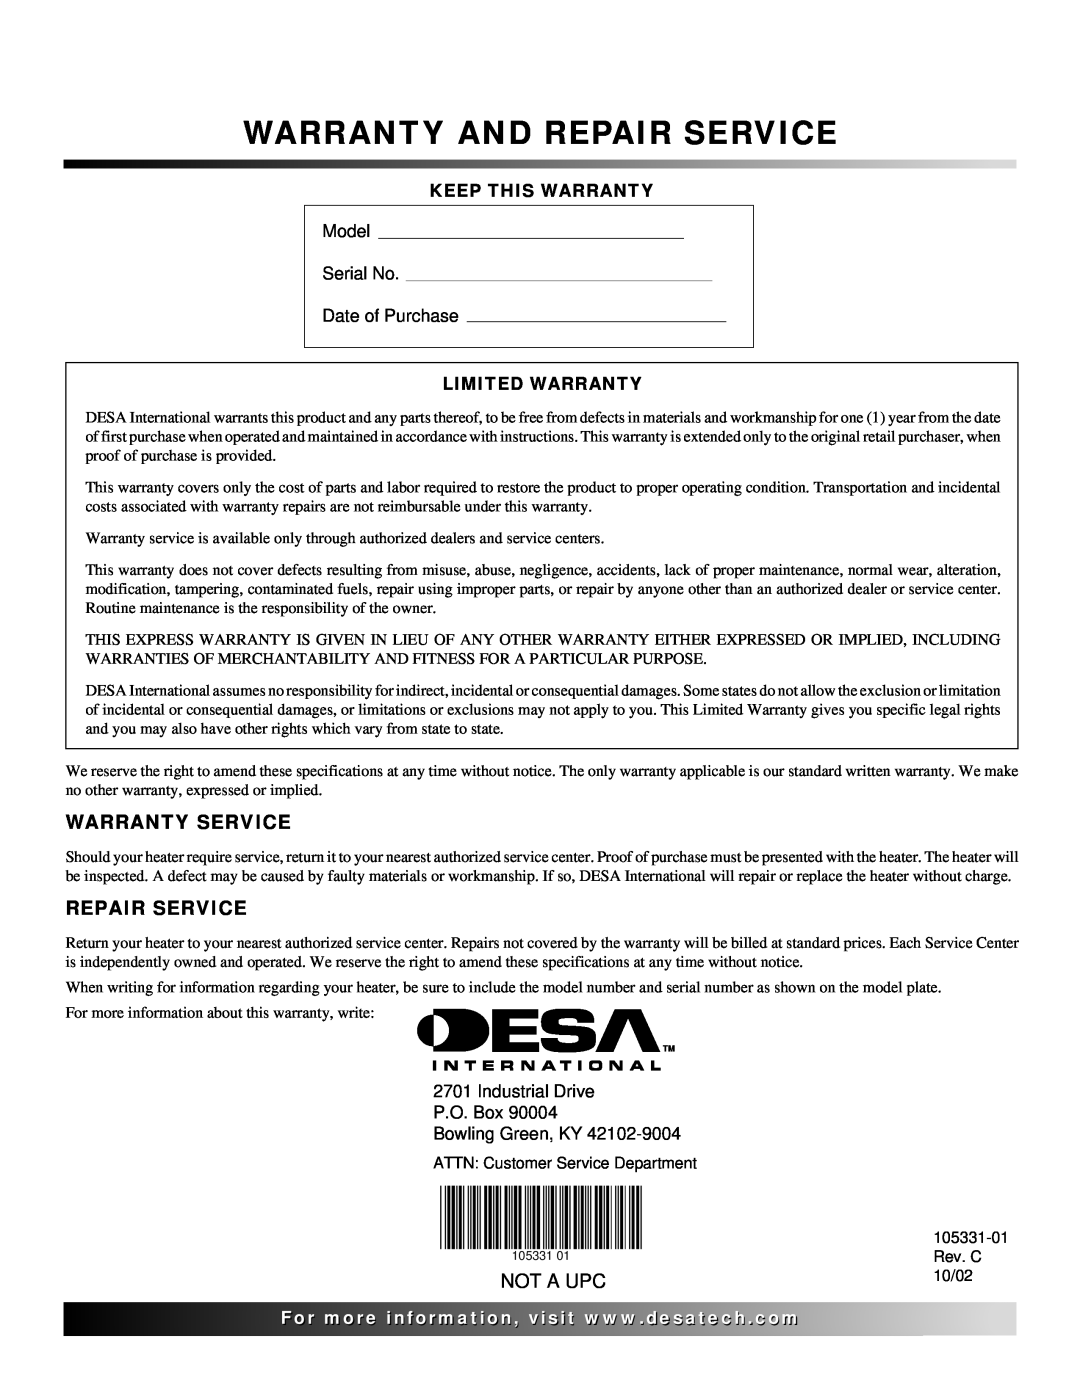 Desa ROPANE CONSTRUCTION HEATER owner manual Warranty And Repair Service, Warranty Service, Not A Upc, Keep This Warranty 